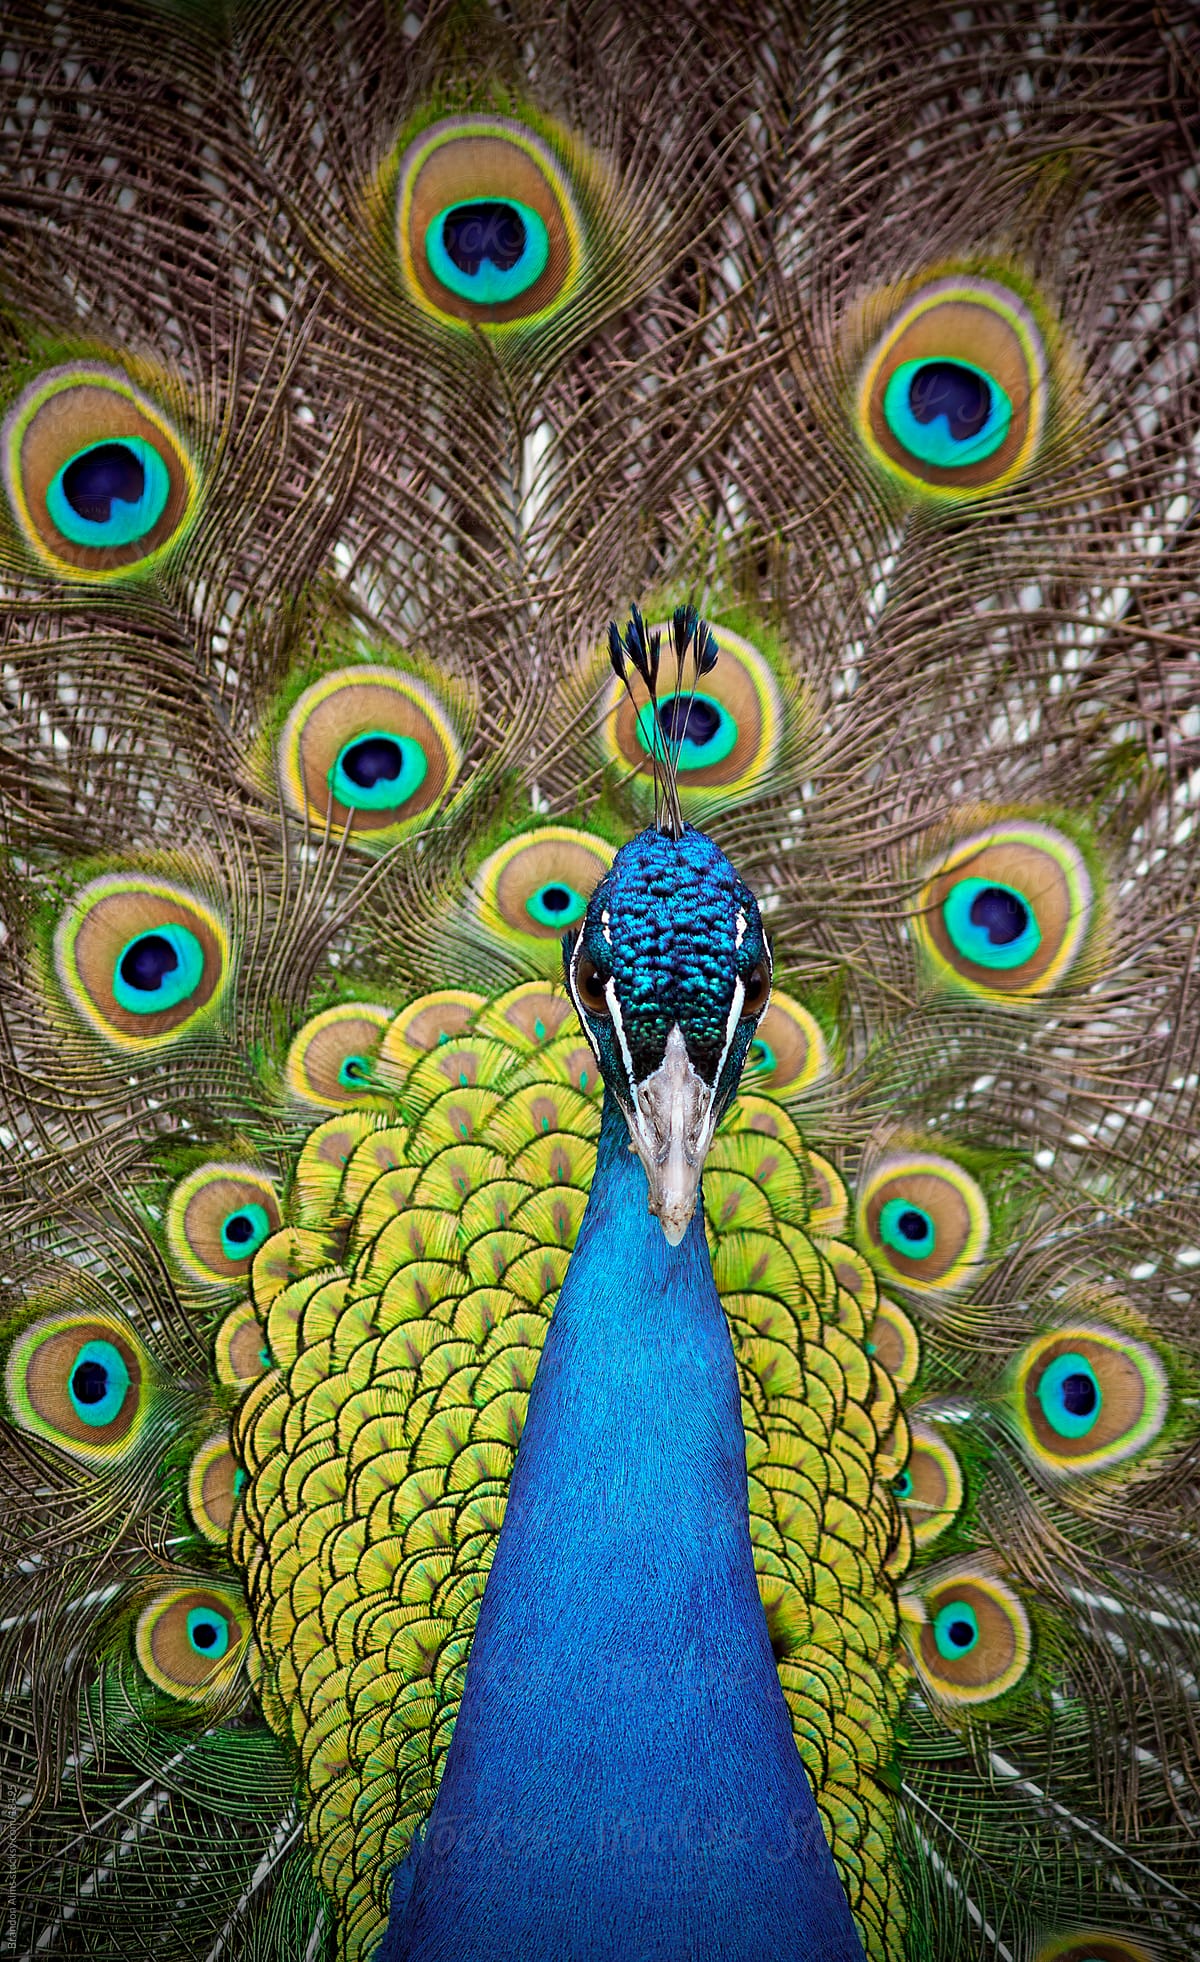 Peacock Portrait Closeup with Feathers Open